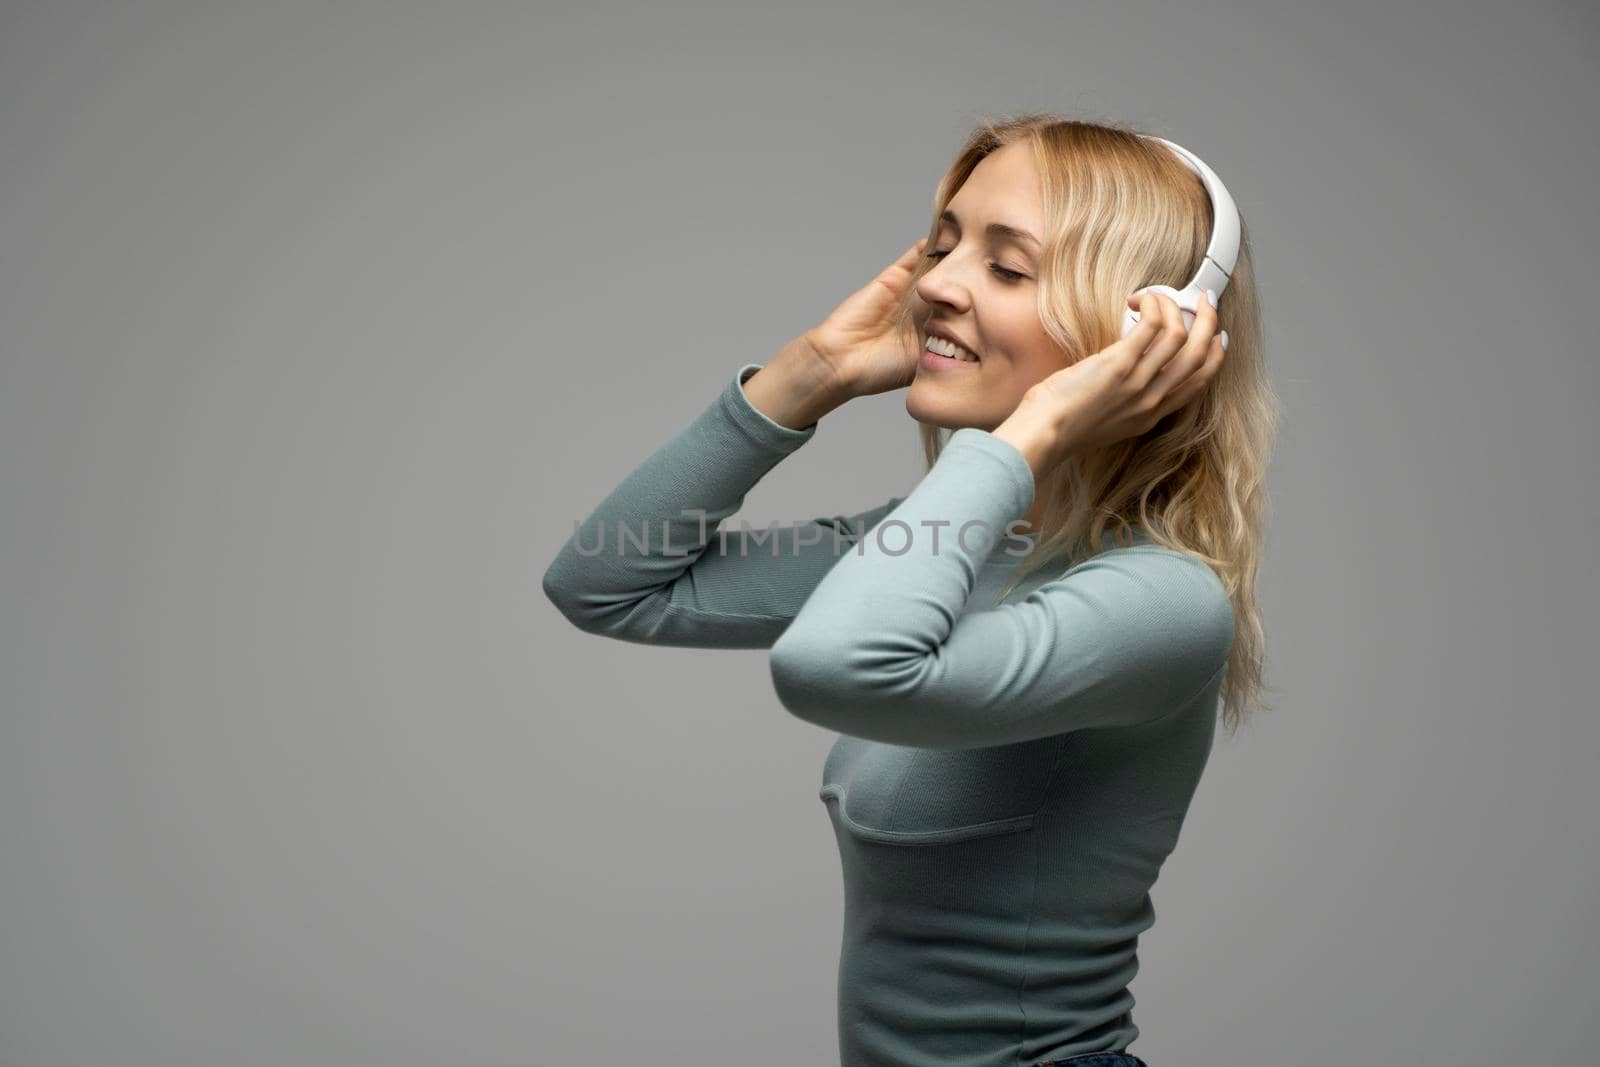 Beautiful attractive young blond woman wearing blue t-shirt and glasses in white headphones listening music and smiling on grey background in studio. Relaxing and enjoying. Lifestyle